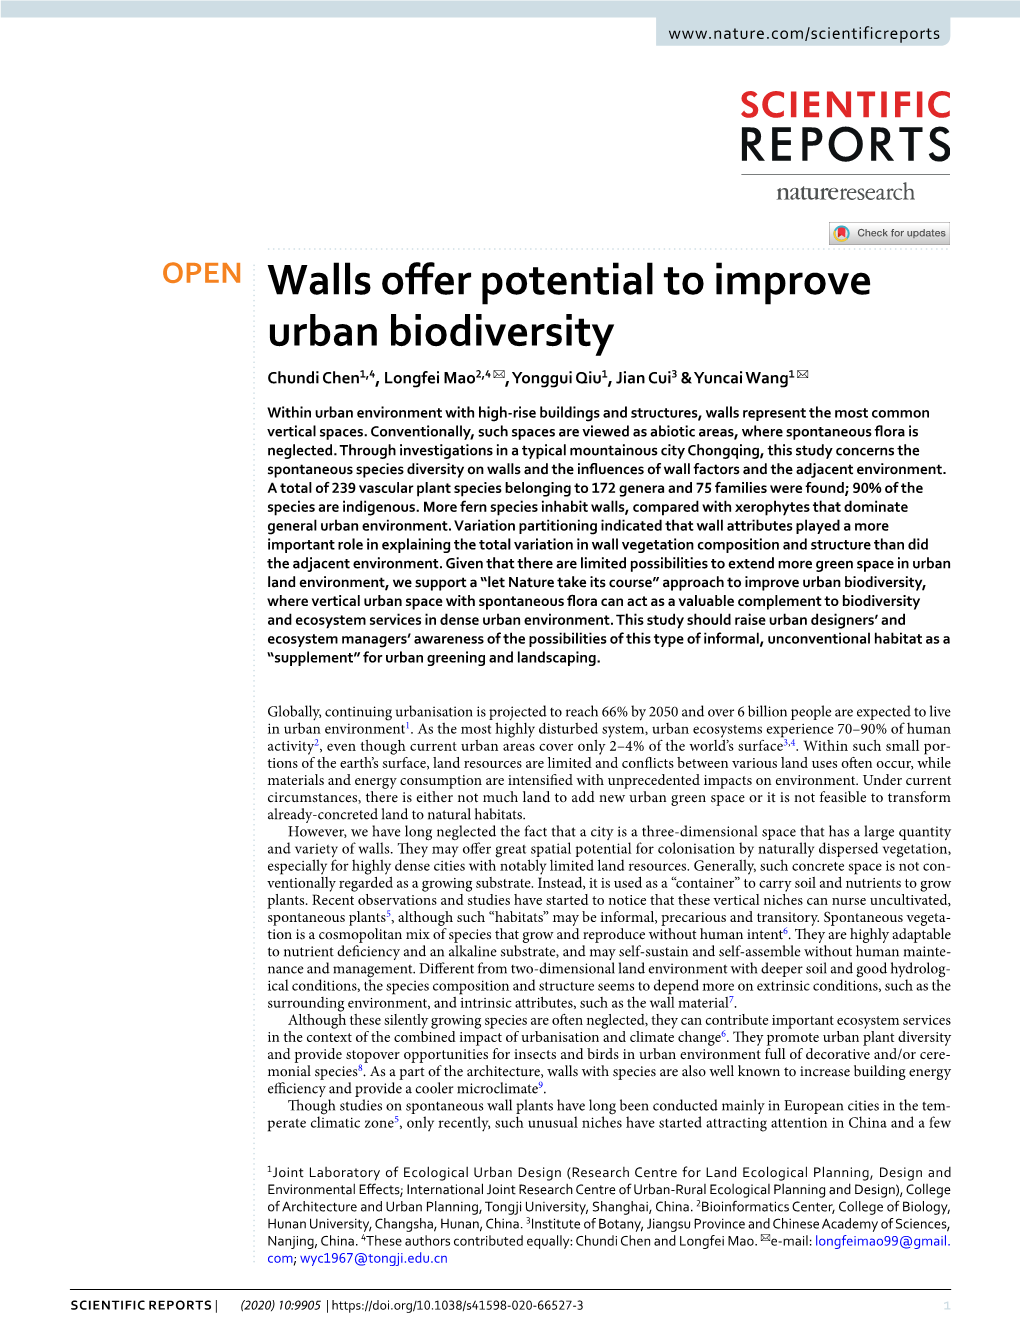 Walls Offer Potential to Improve Urban Biodiversity